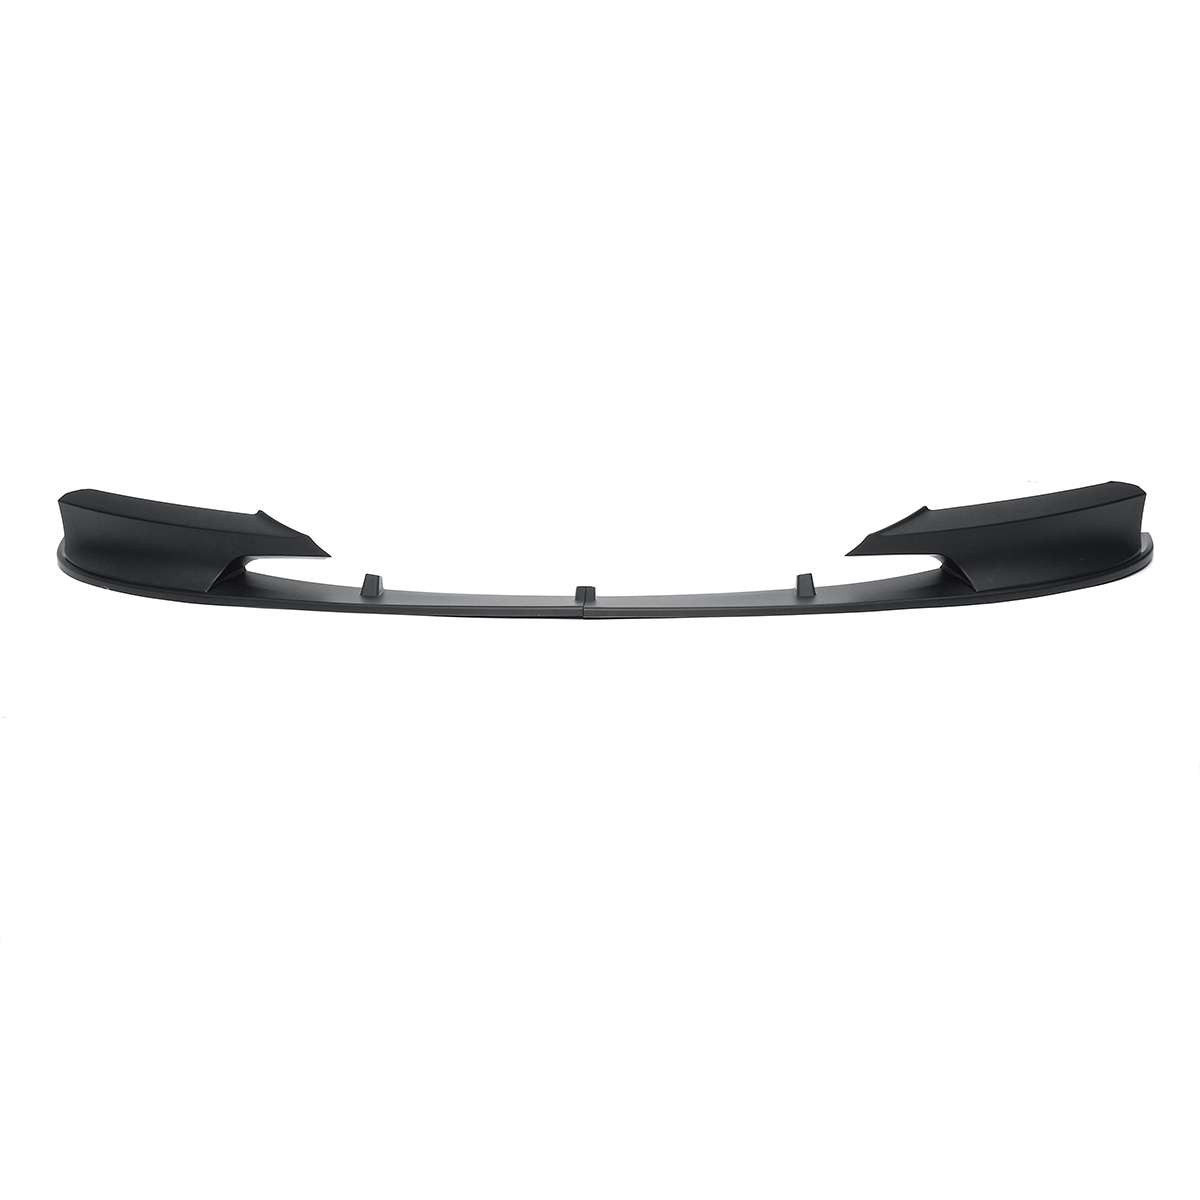 2-x-Matte-Black-Surface-Front-Bumper-Cover-Protector-Splitter-Lip-For-BMW-F30-3-Series-M-Style-12-18-1578471